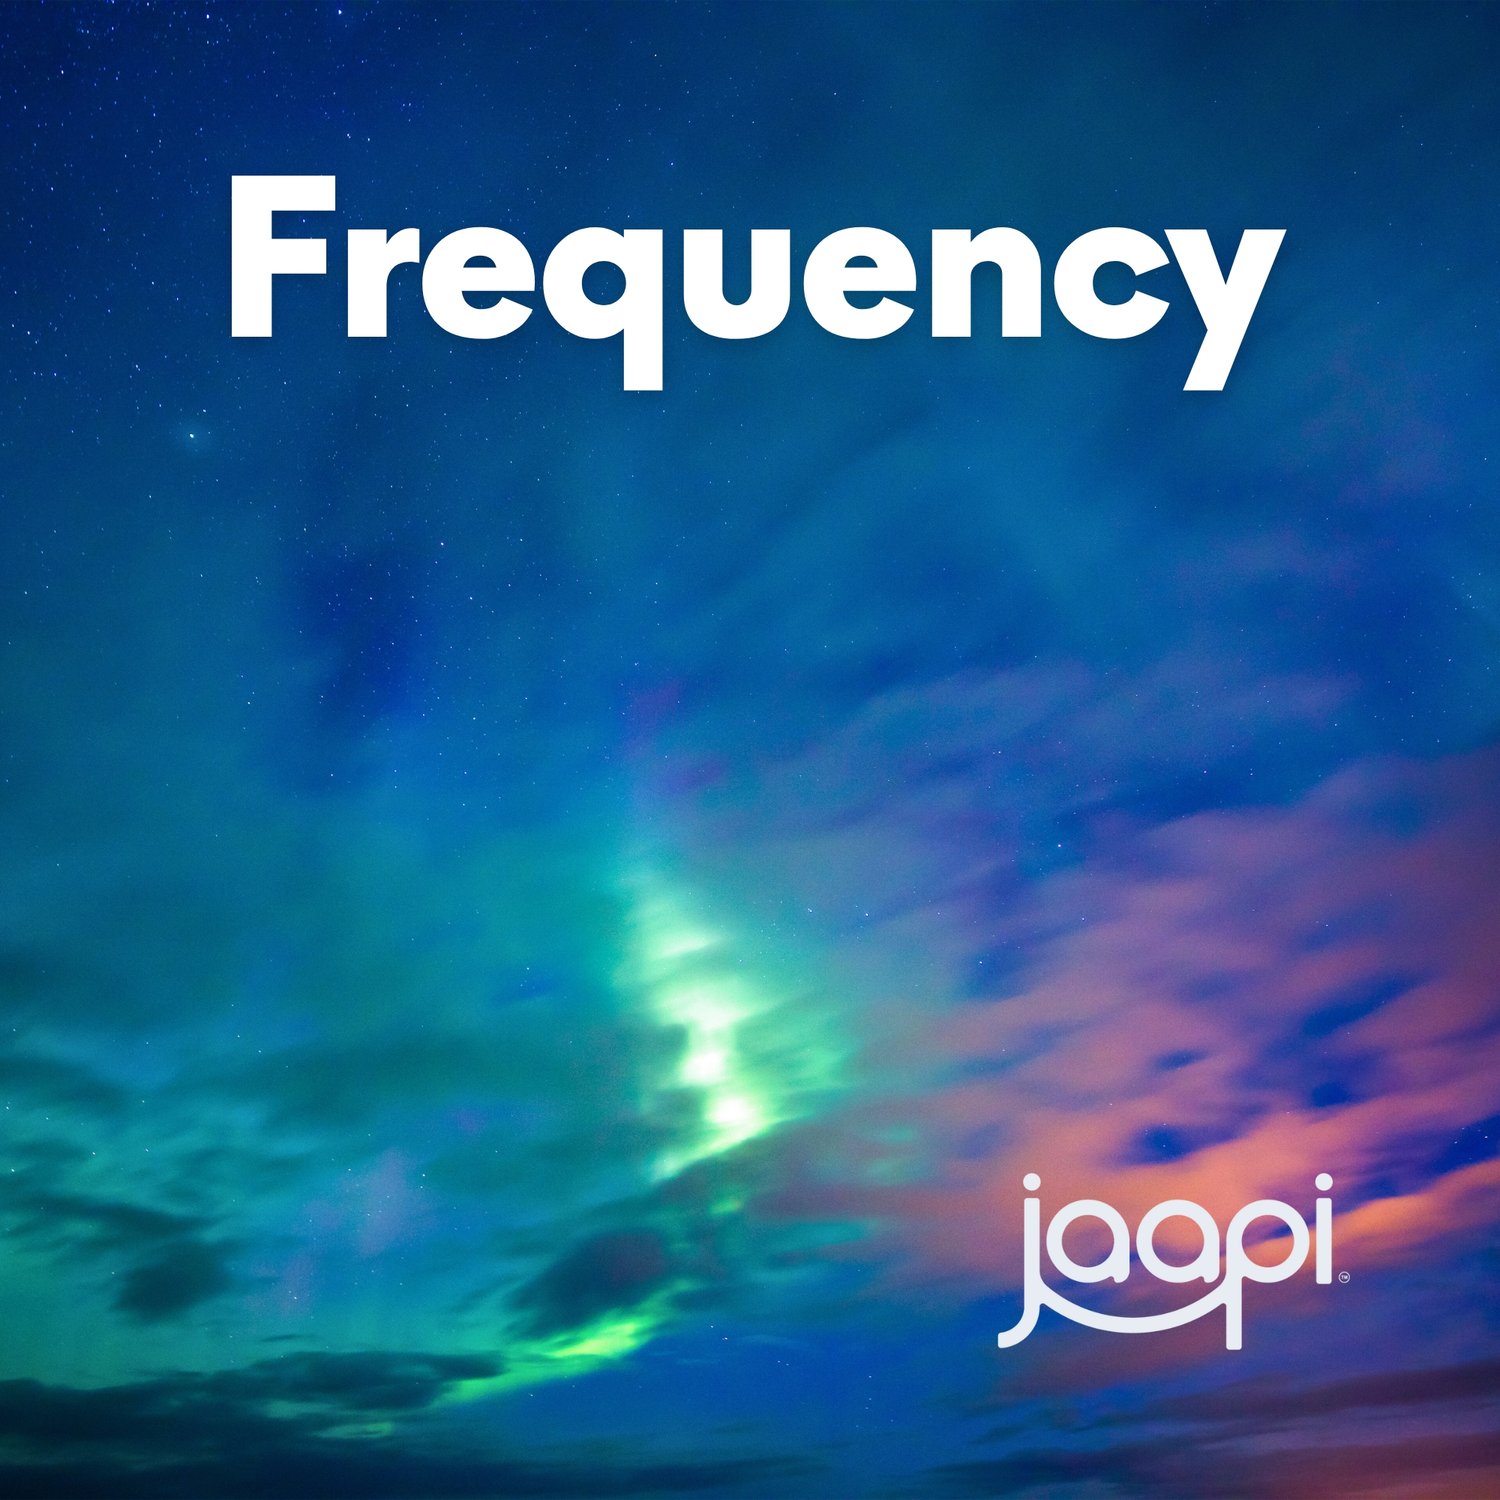 Frequency: Deep resonance for healing. Curated by Jaapi Media.